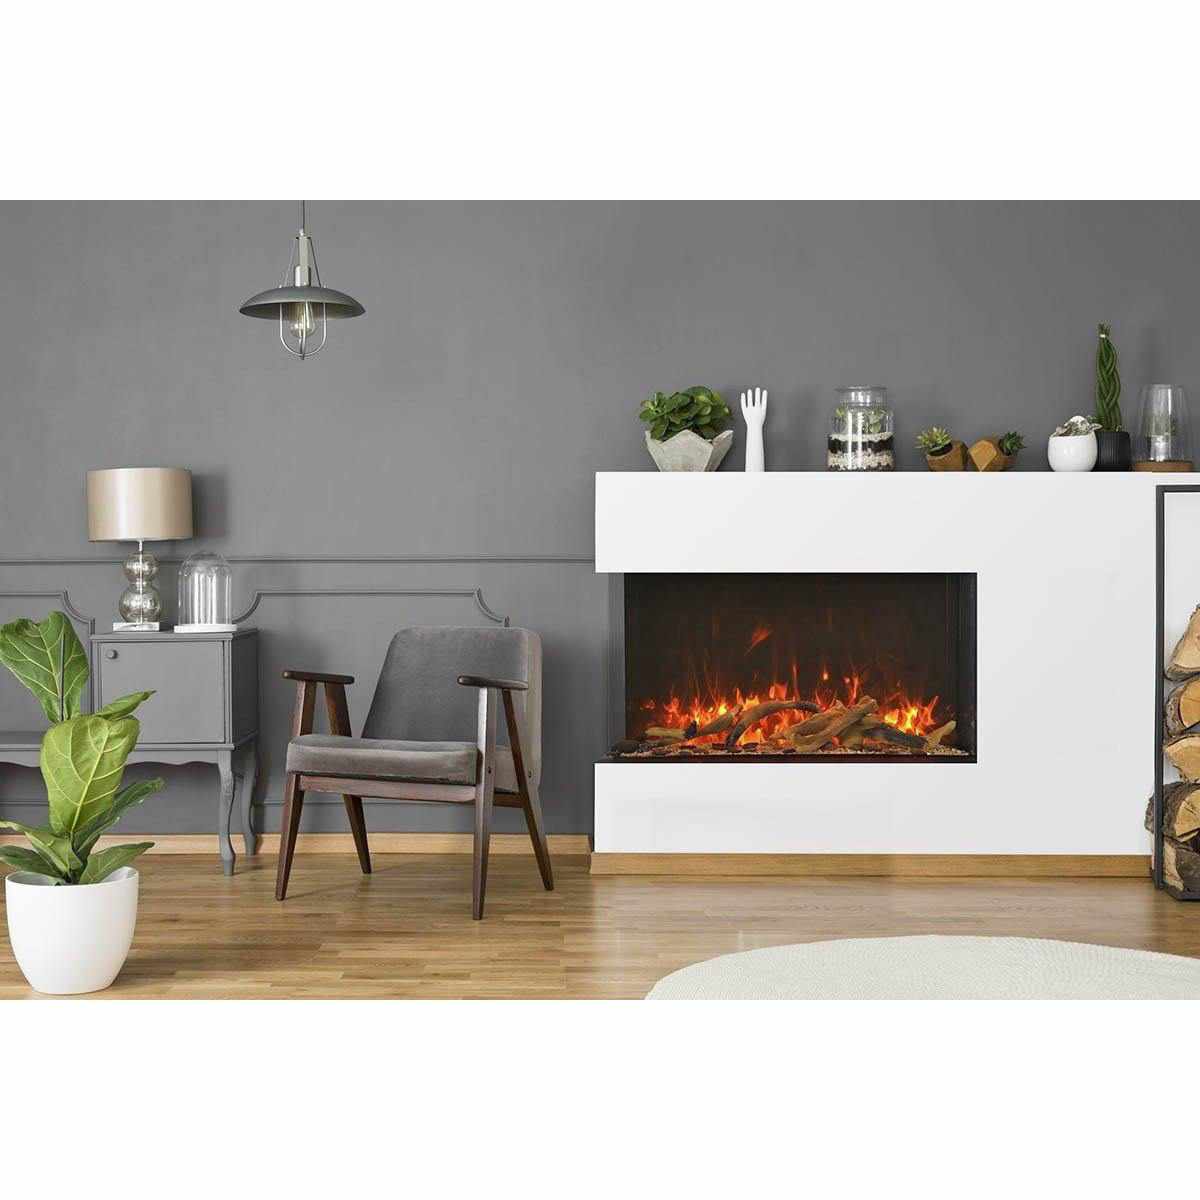 Amantii 40-TRU-VIEW-XL Electric Built-In Fireplace - 3 Sided 101.60 cm Wide - Outdoorium